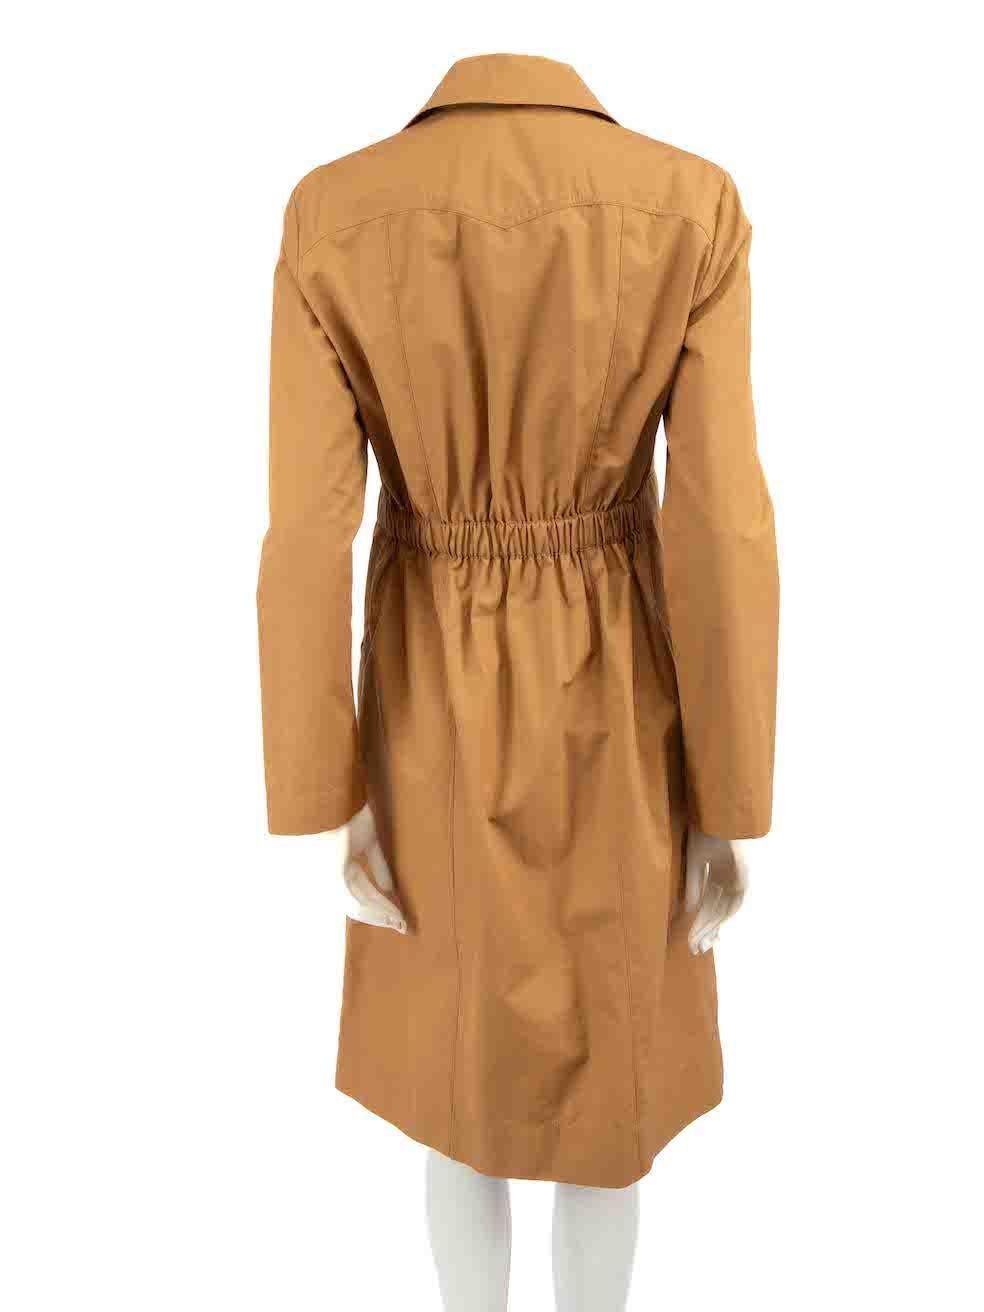 Sonia Rykiel Brown Belted Midi Shirt Dress Size M In Good Condition For Sale In London, GB